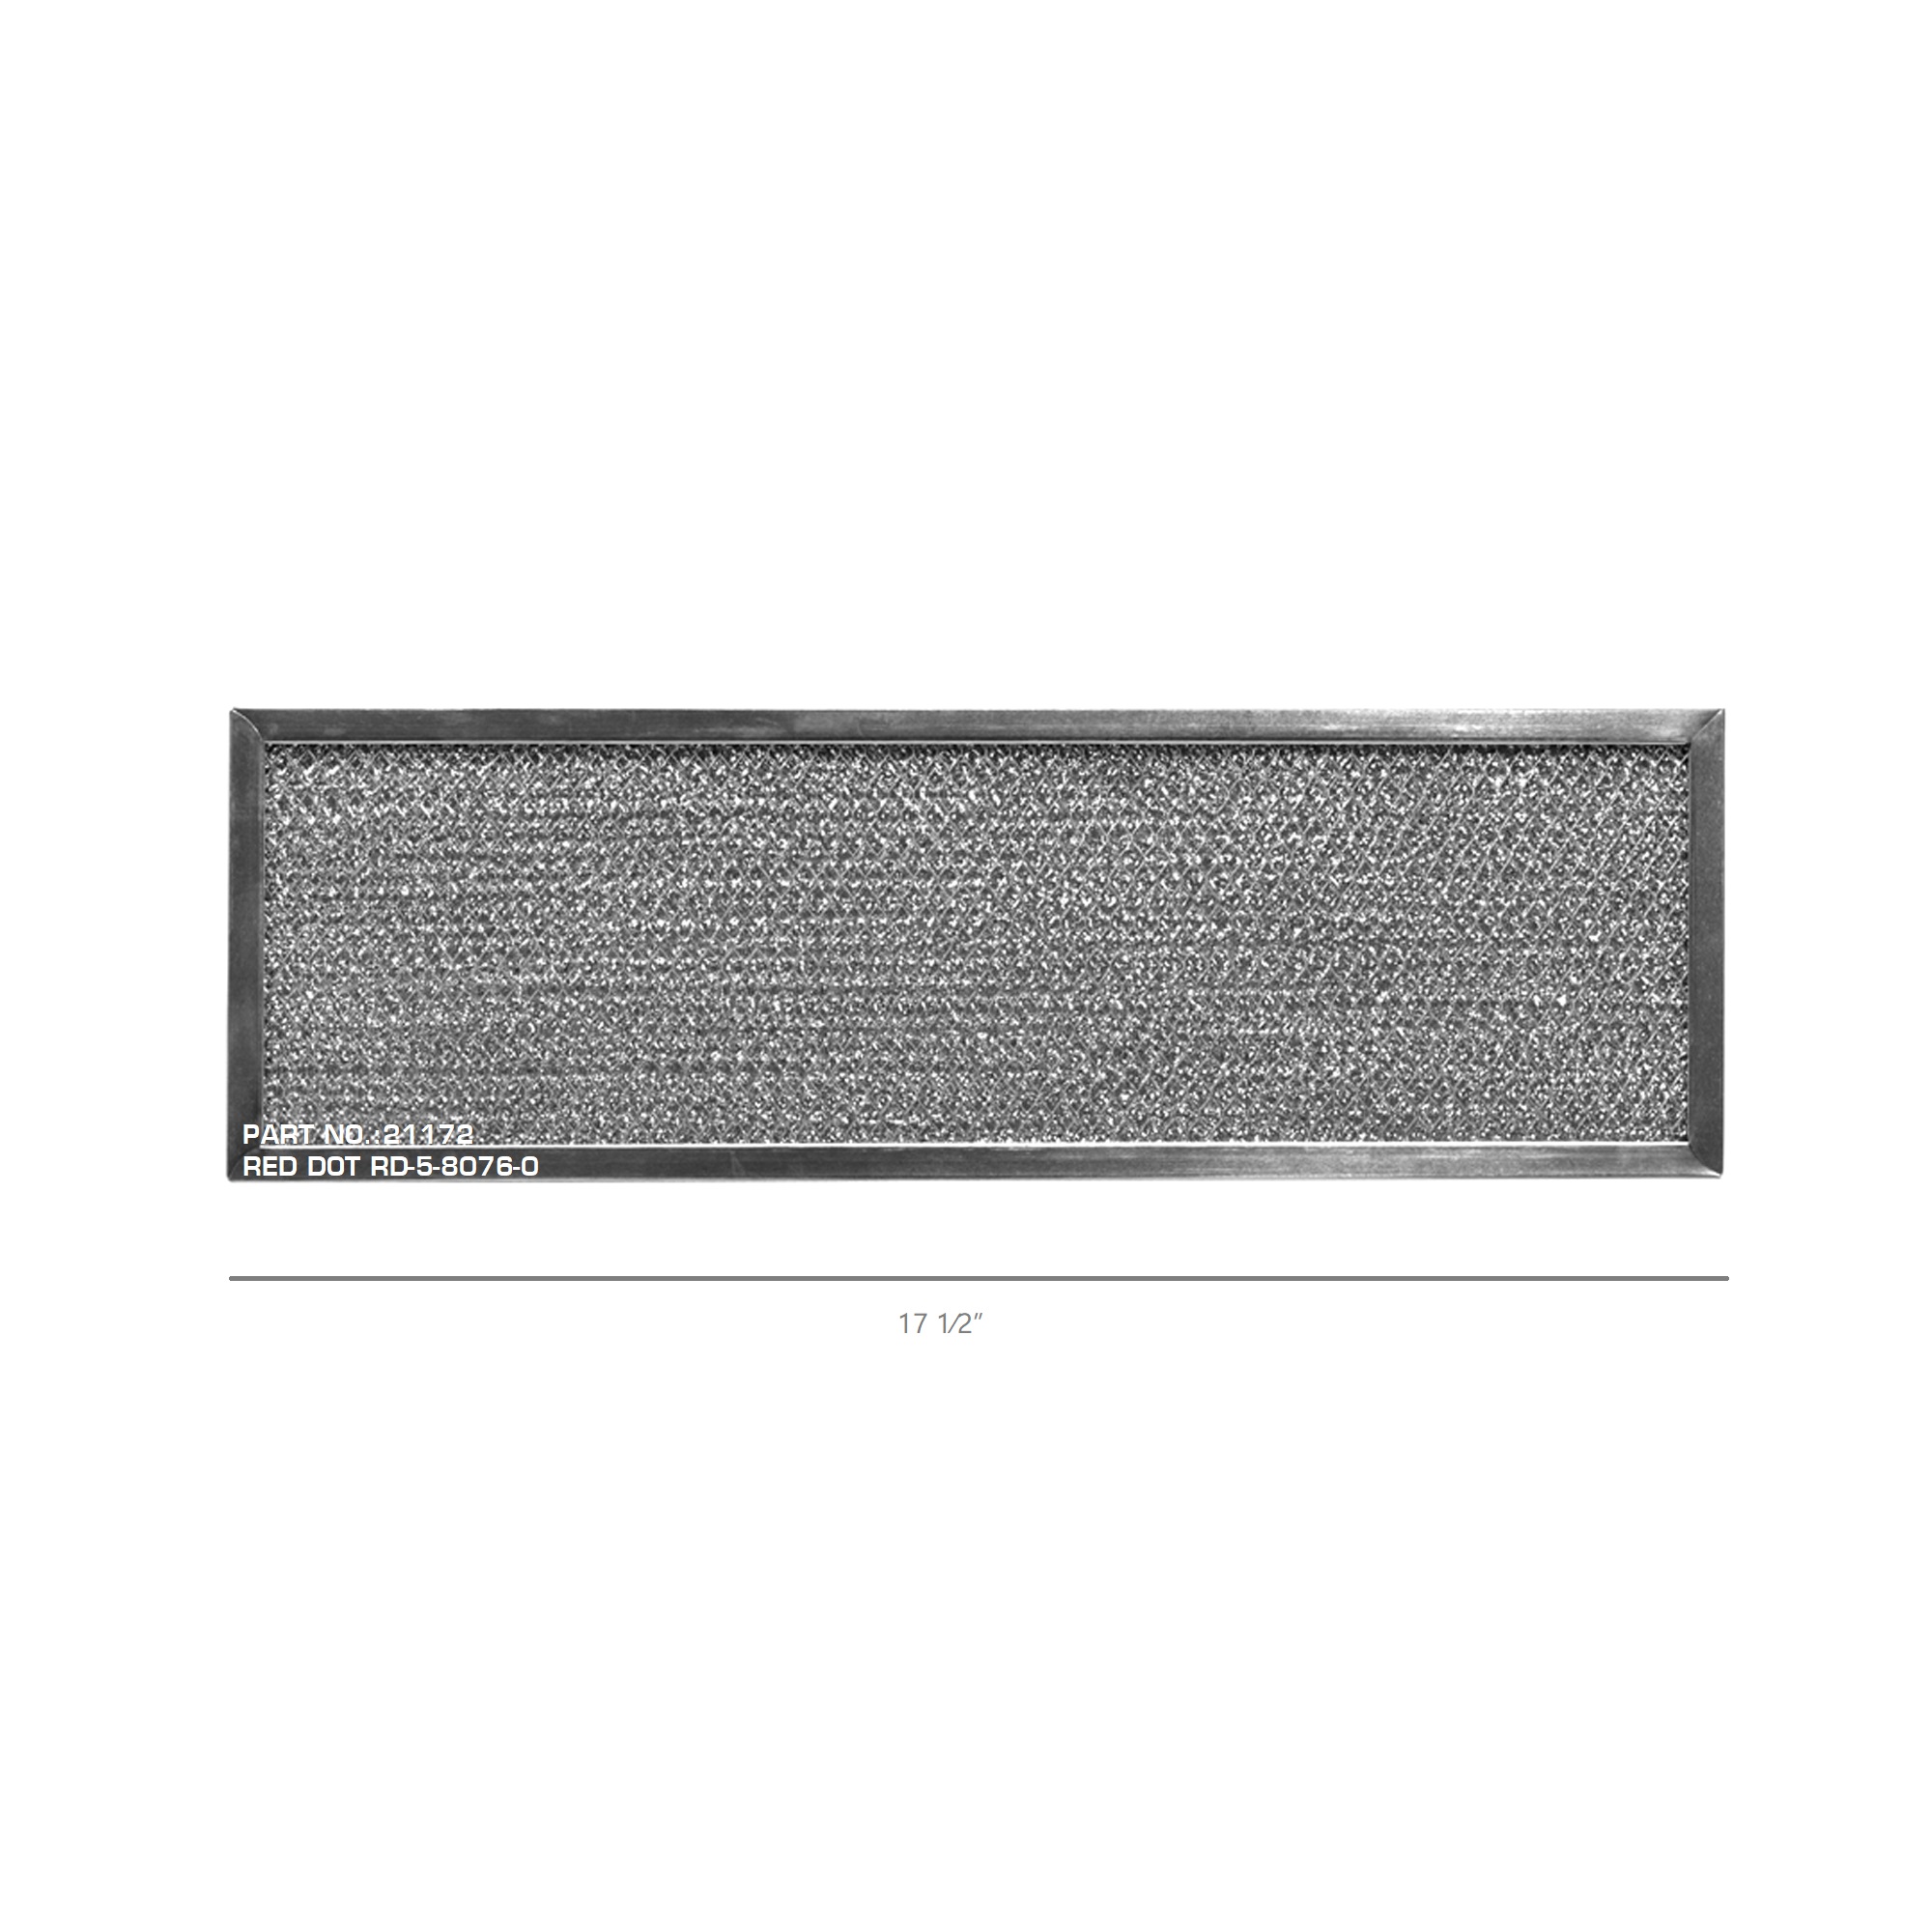 21172 UNIVERSAL AC CABIN AIR FILTER FOR REDDOT